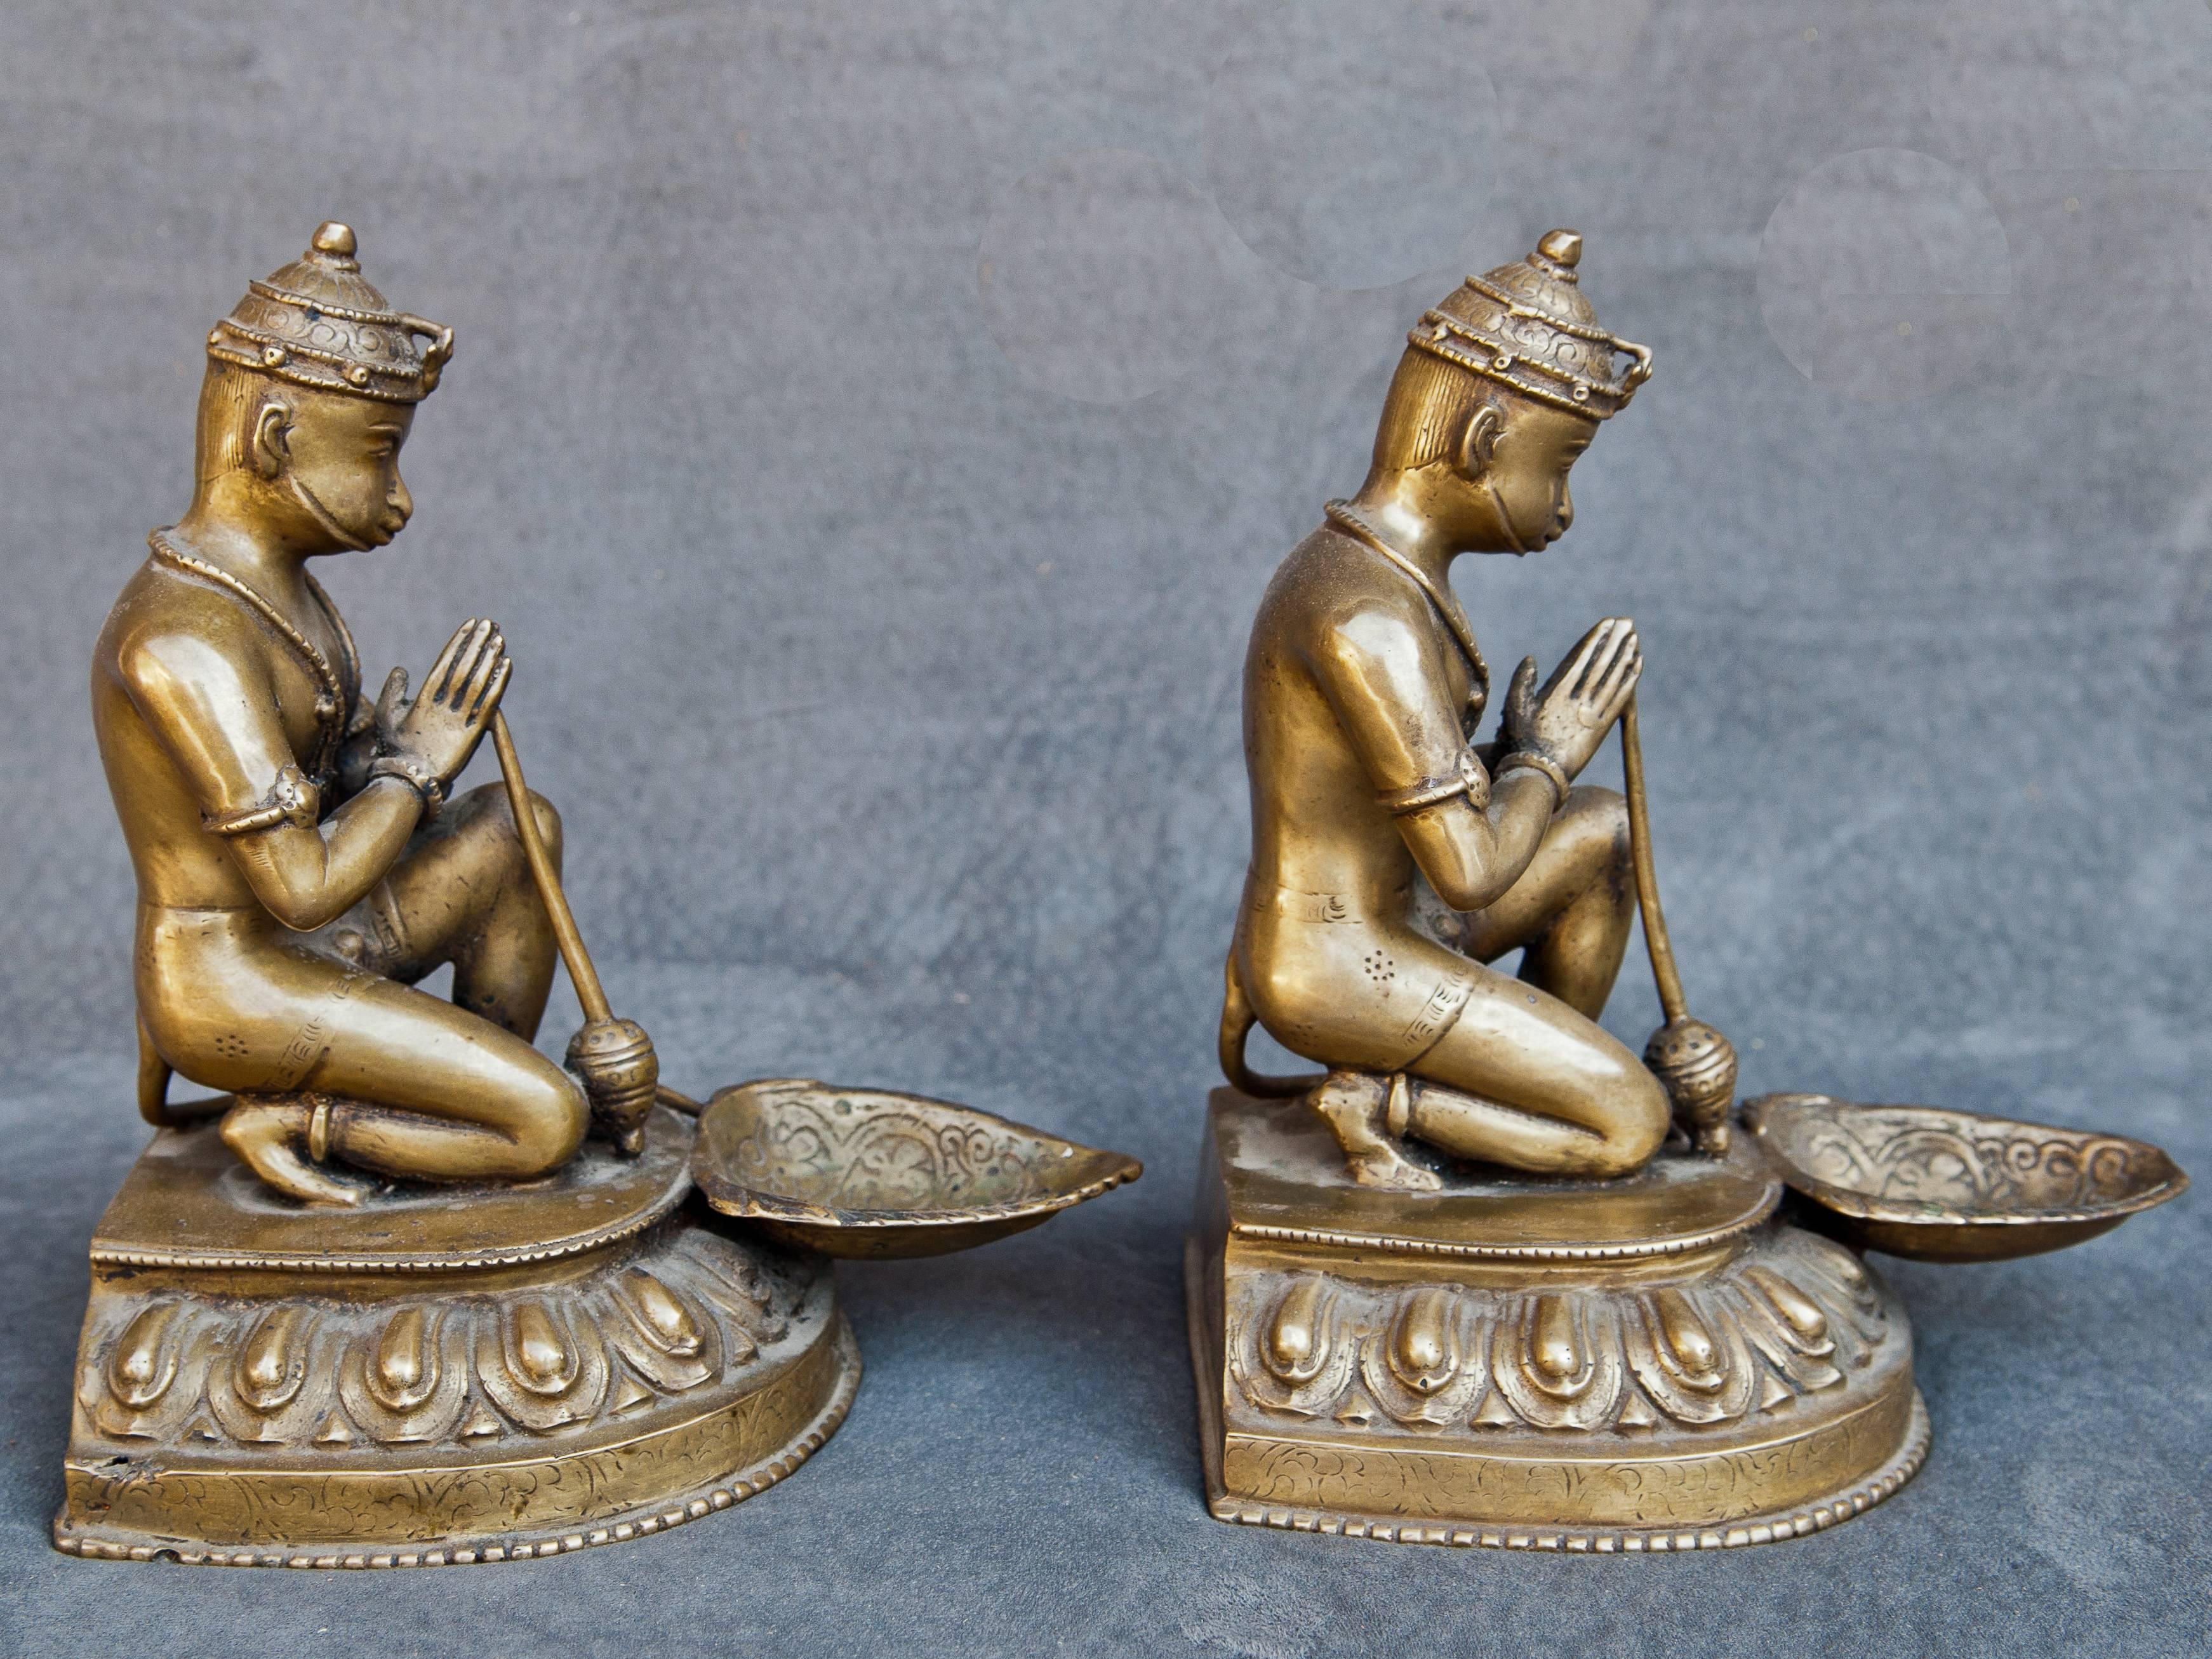 Pair of bronze Hanuman oil lamps, mid-20th century, Nepal.
Offered by Bo Tree Source.
Hand cast bronze oil lamps placed in a house shrine or temple. They portray the God Hanuman, devotee of Lord Rama and a beloved central character in the